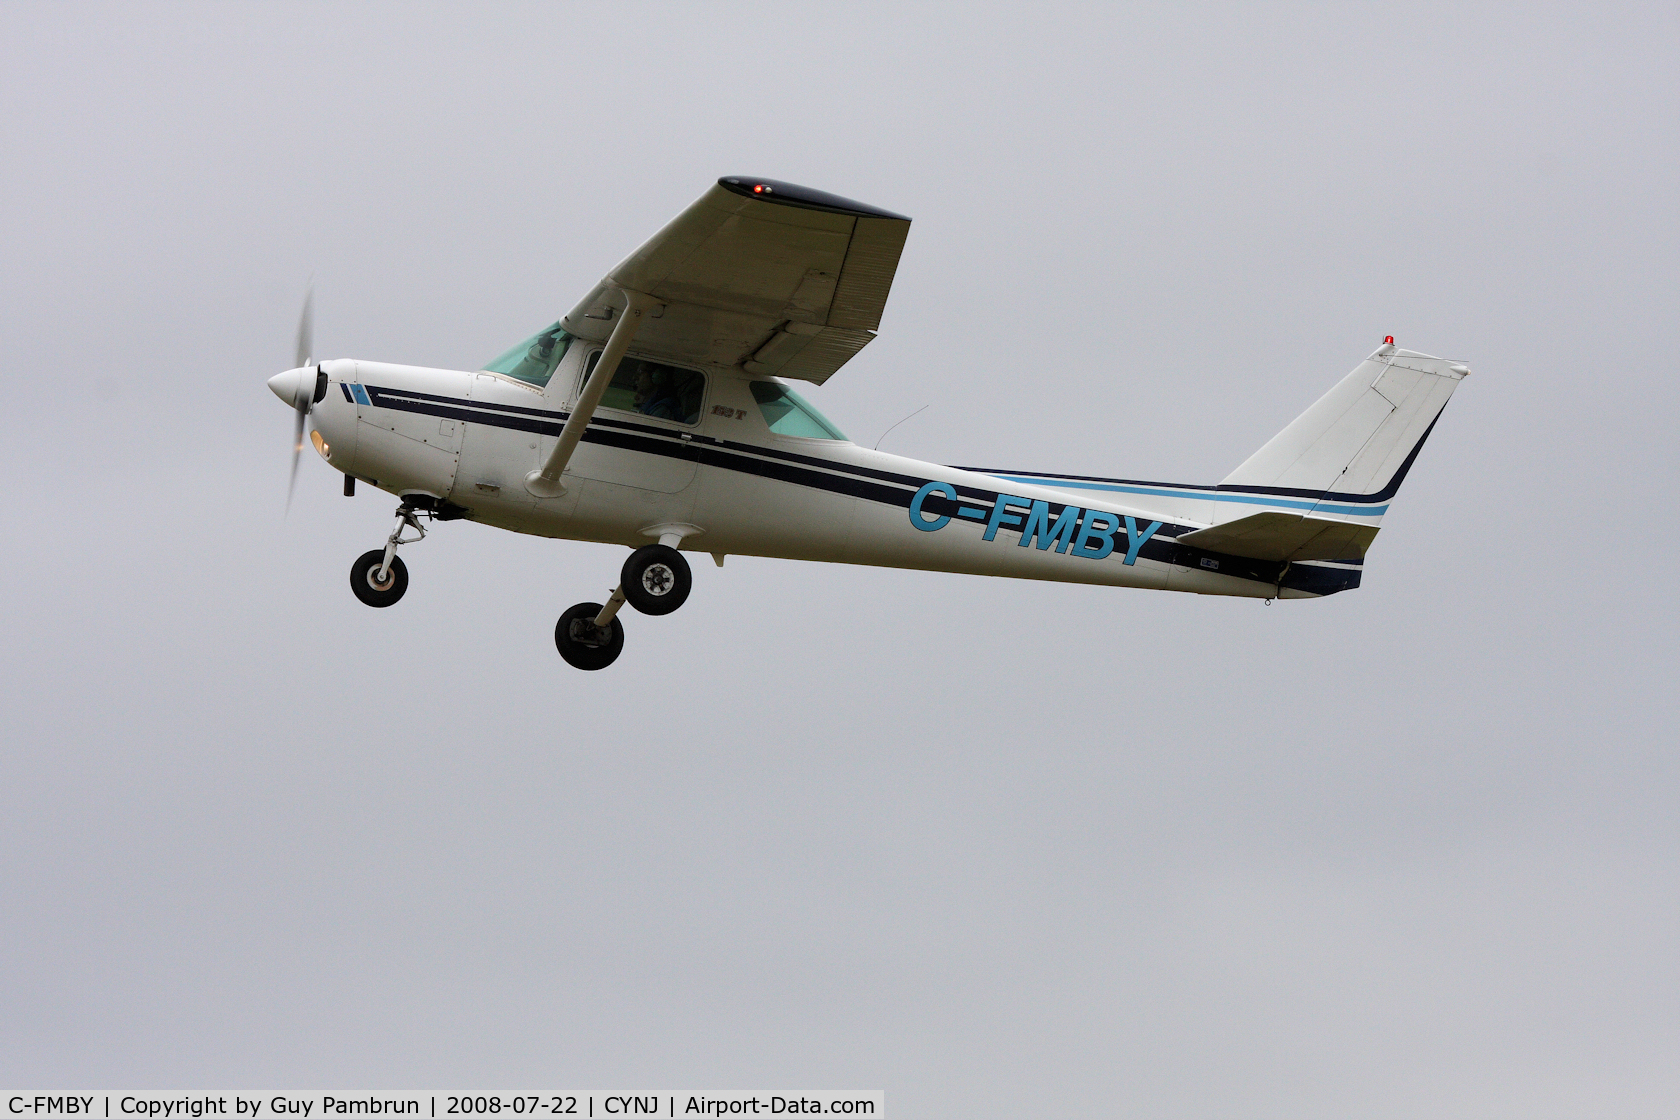 C-FMBY, 1981 Cessna 152 C/N 15285311, Student taking off